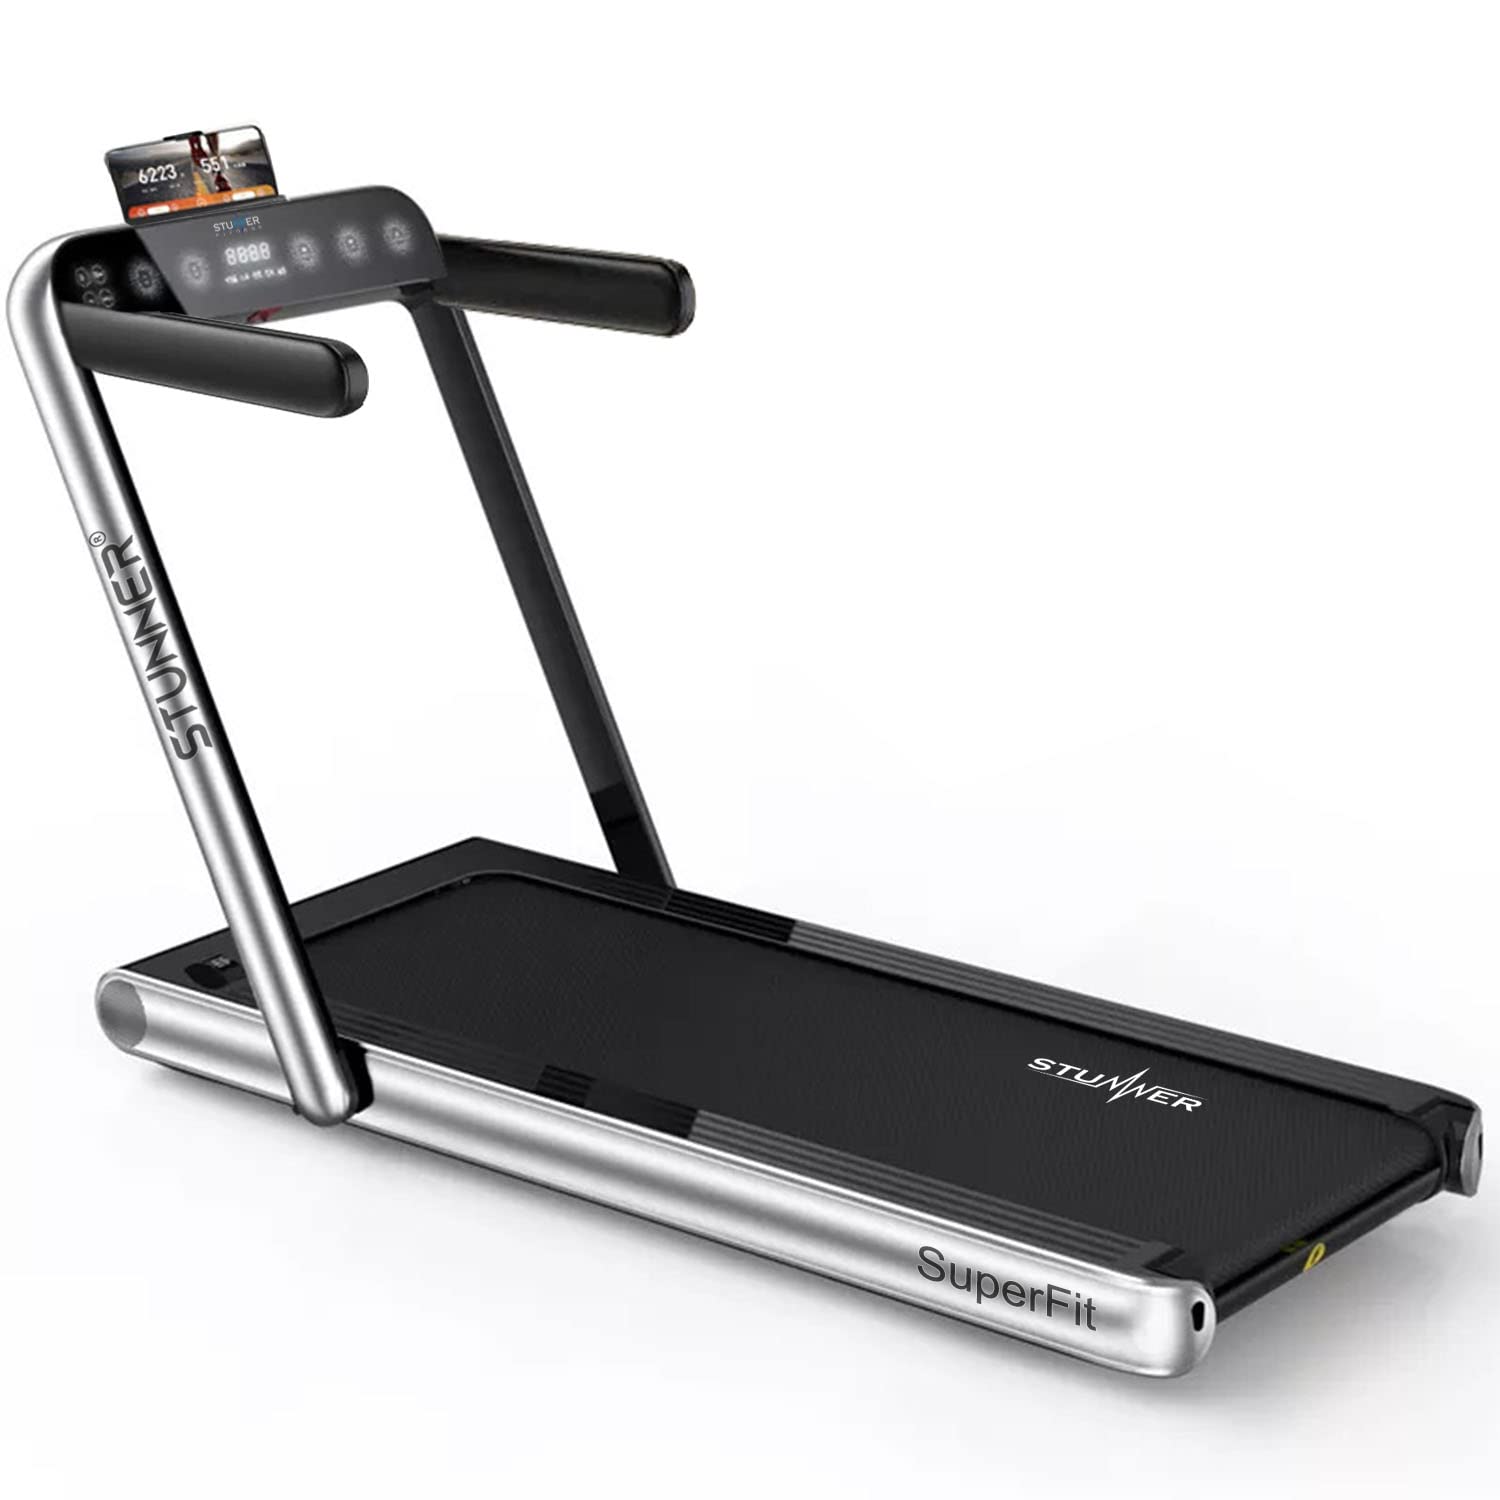 Stunner Fitness Superfit 2.25 Hp Motorized Treadmill is one of the best budget treadmills in India